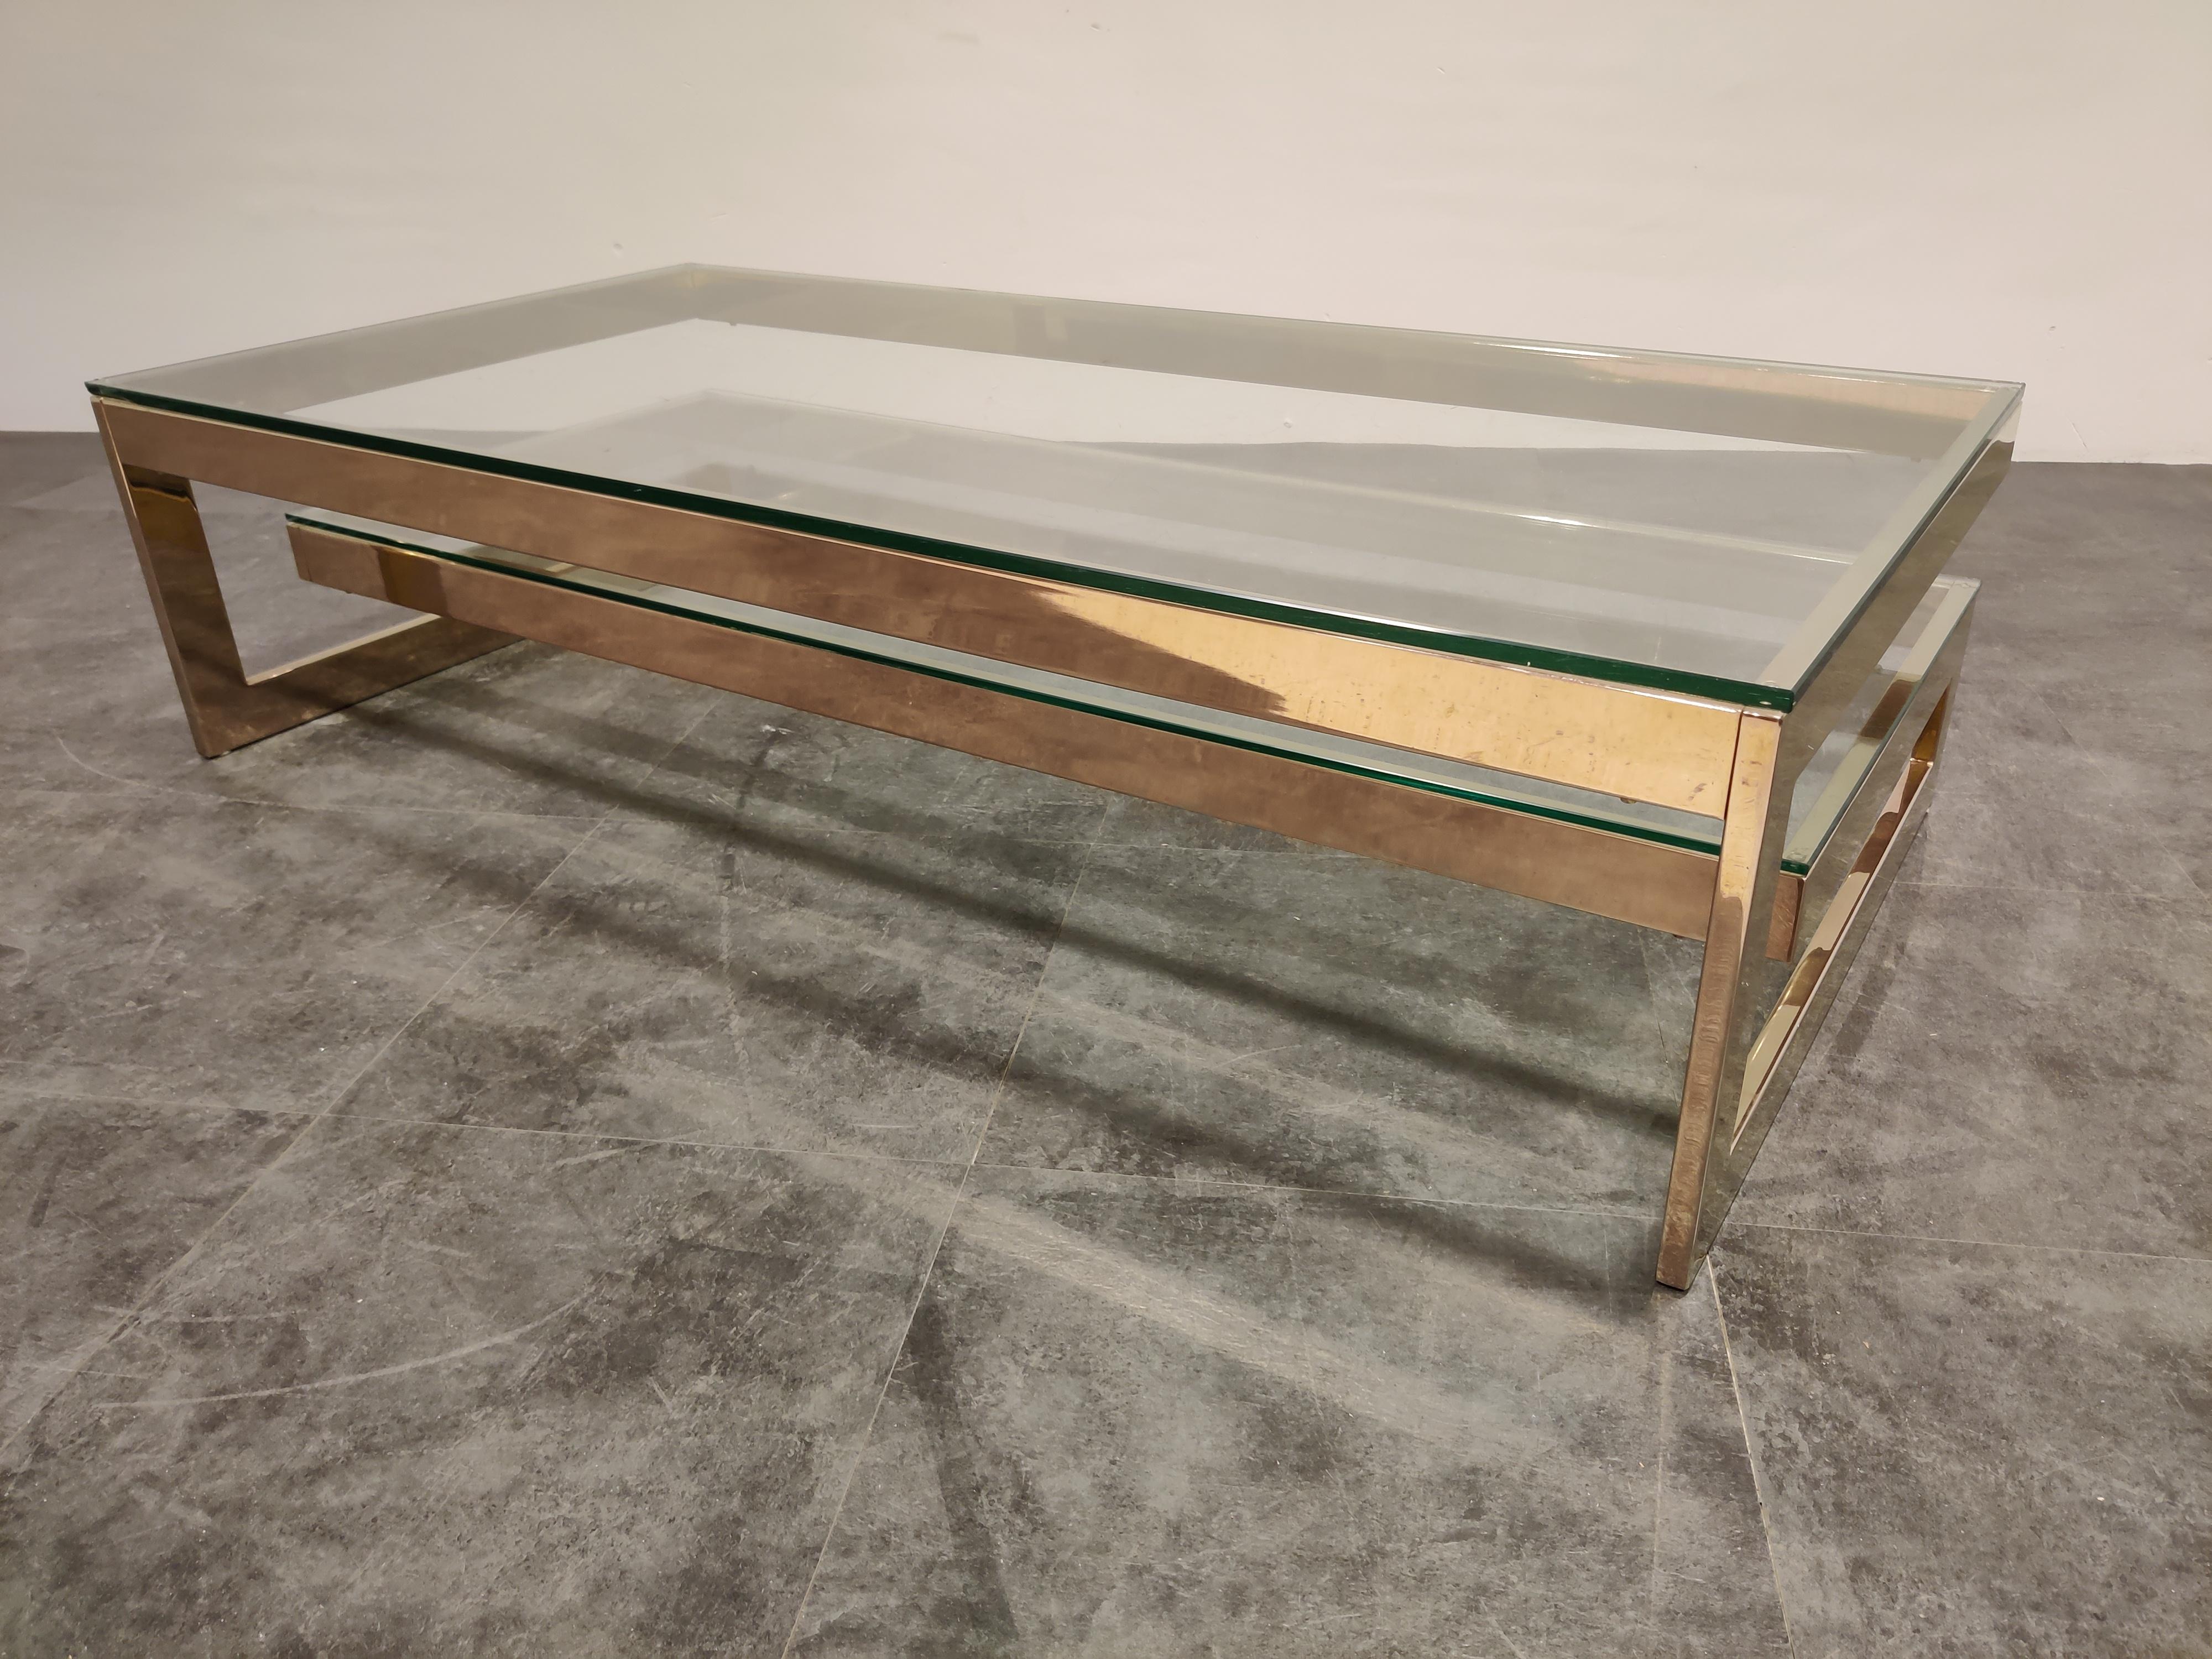 This table is a popular model and is referred to as the 'G' model

Belgochrom produced quality furniture pieces with a luxurious appeal.

The table has had one previous owner and was maintained very well.

Very good overall condition.

1970s